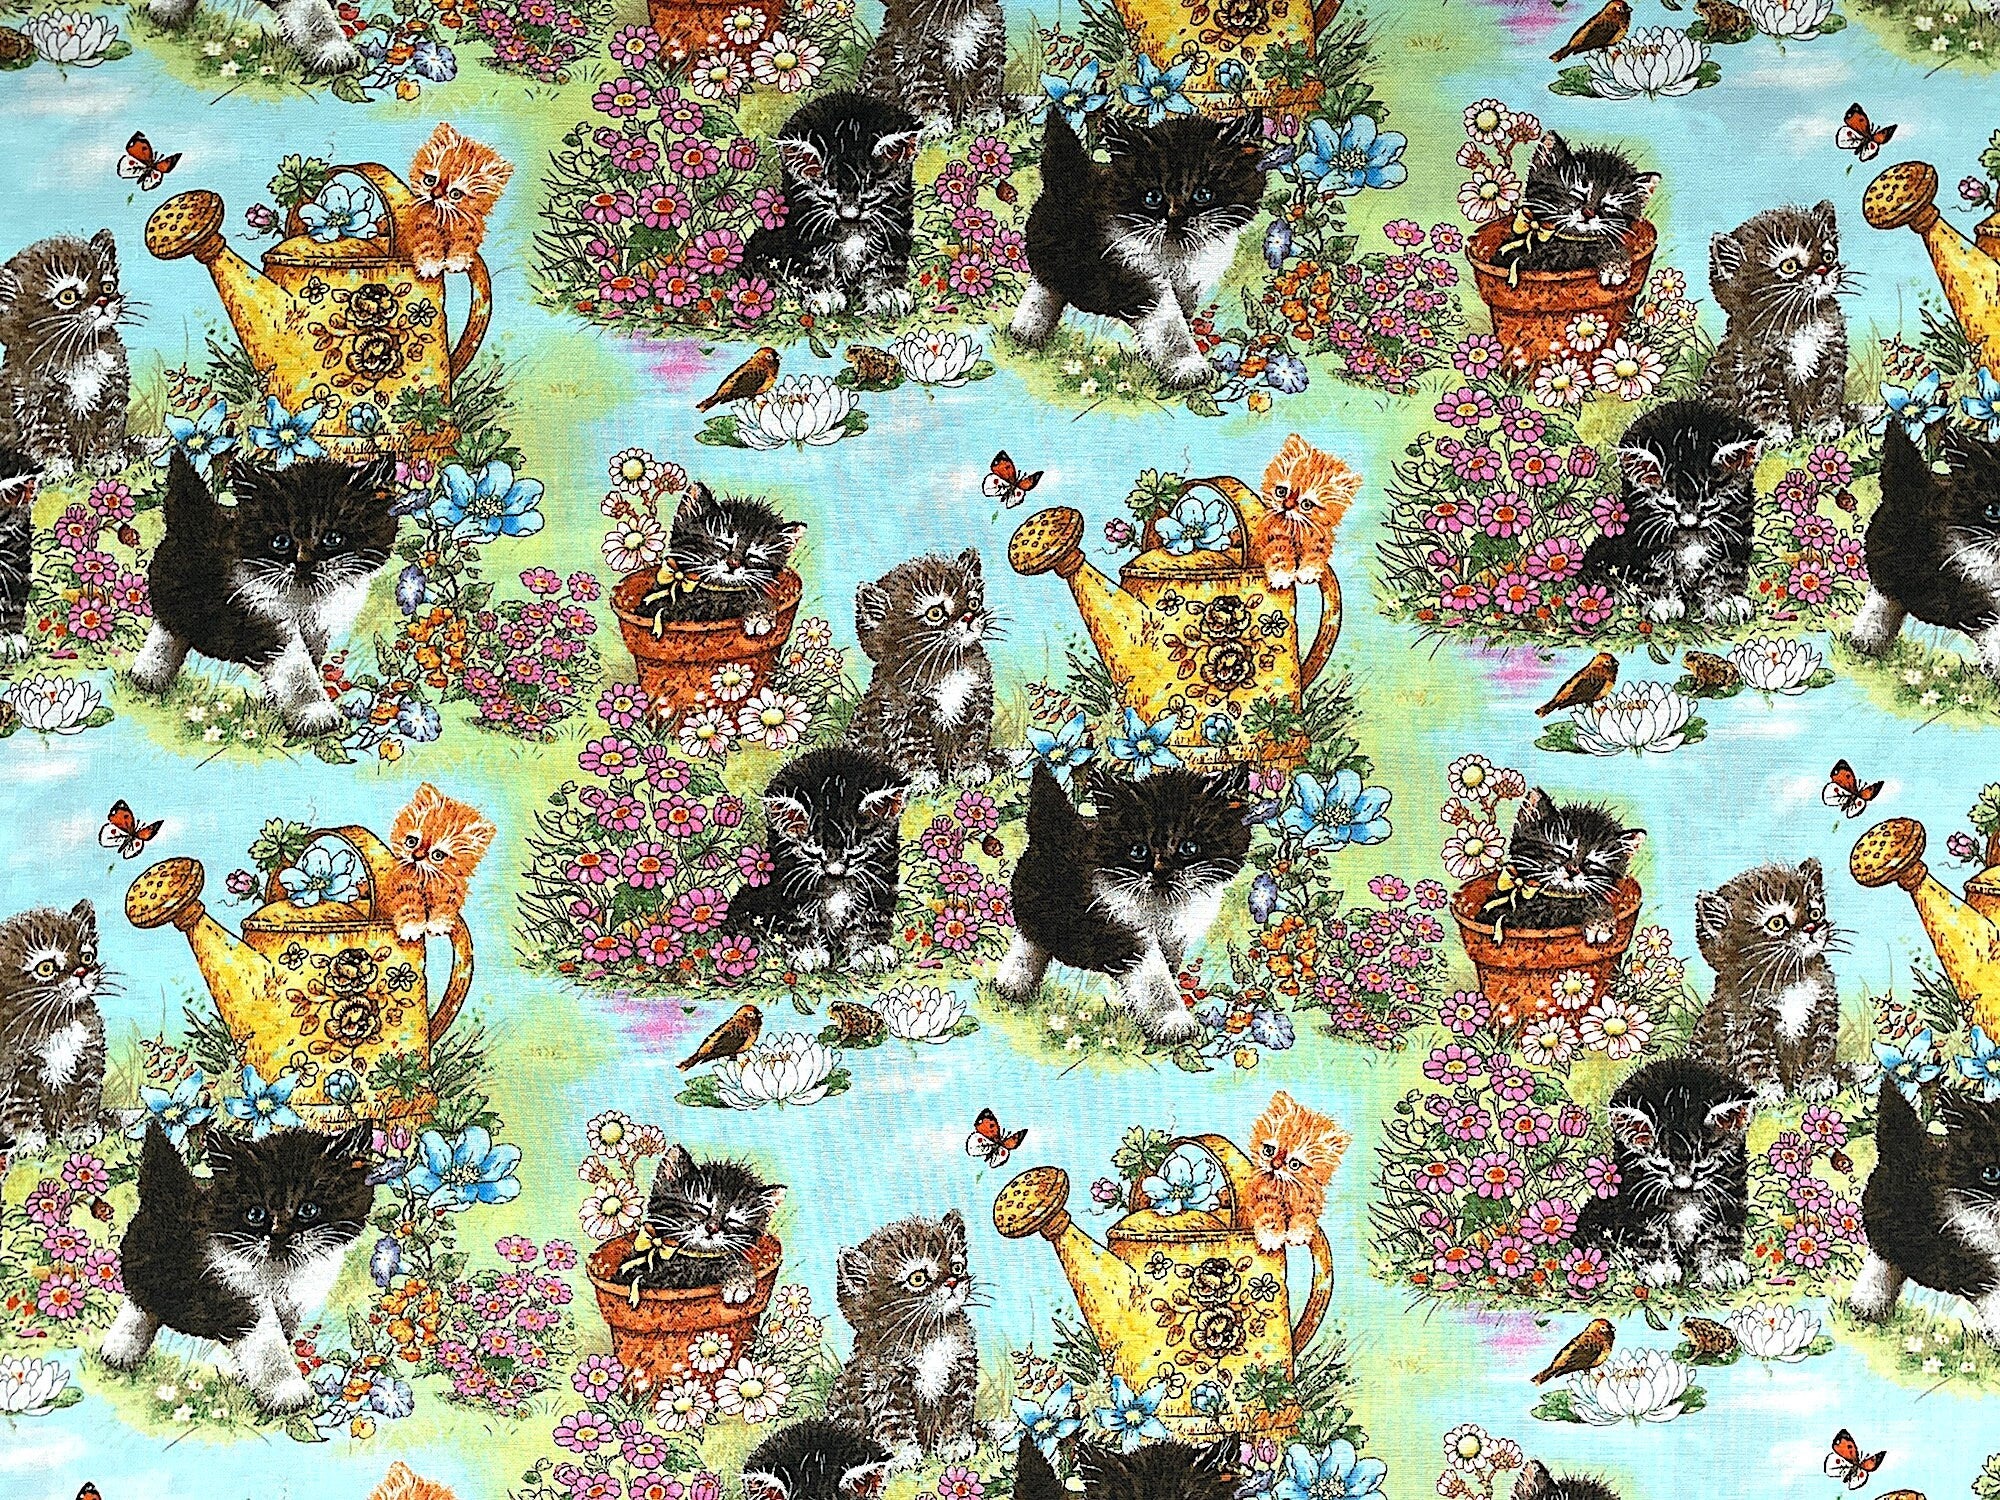 This cotton fabric is covered with cats and flowers. Some of the cats are sleeping in pots, some are watching frogs, butterflies or birds and others are just walking amongst the flowers.